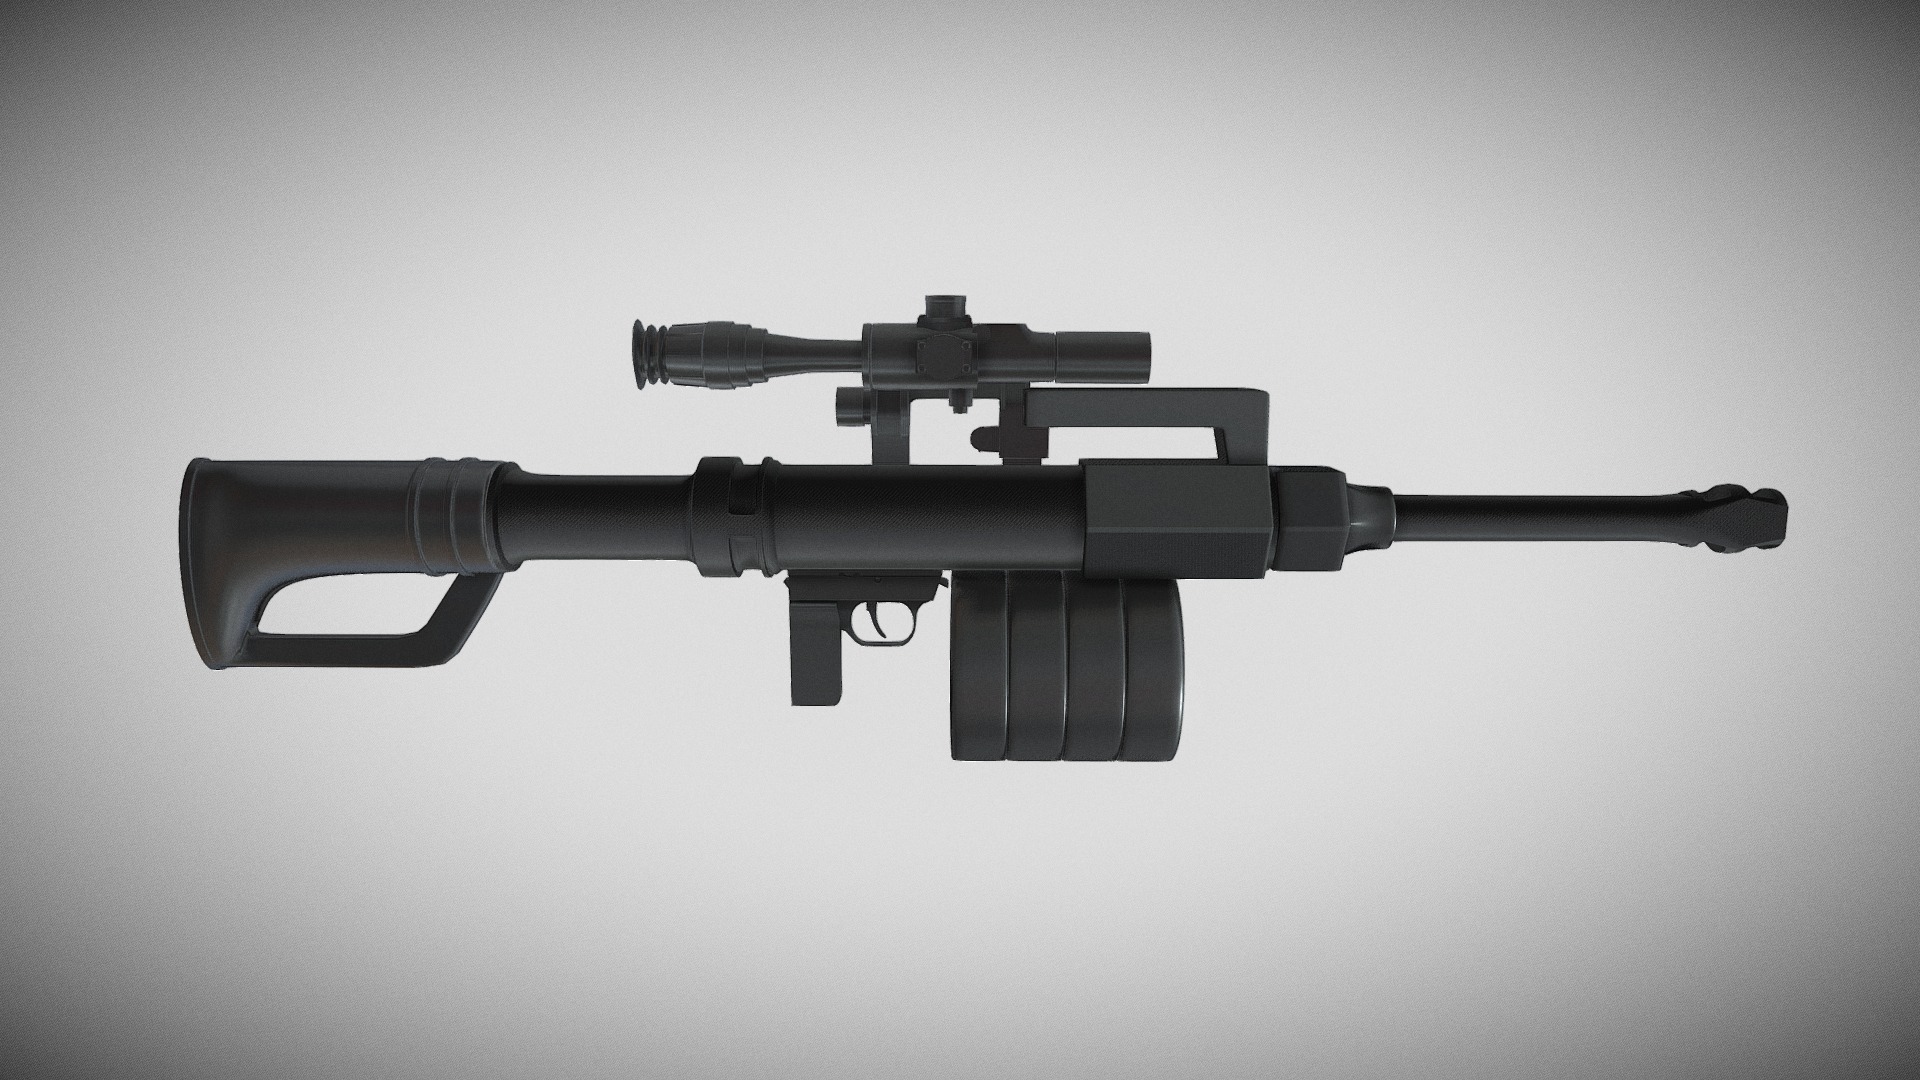 3D model LG5 - This is a 3D model of the LG5. The 3D model is about a black gun with a white background.